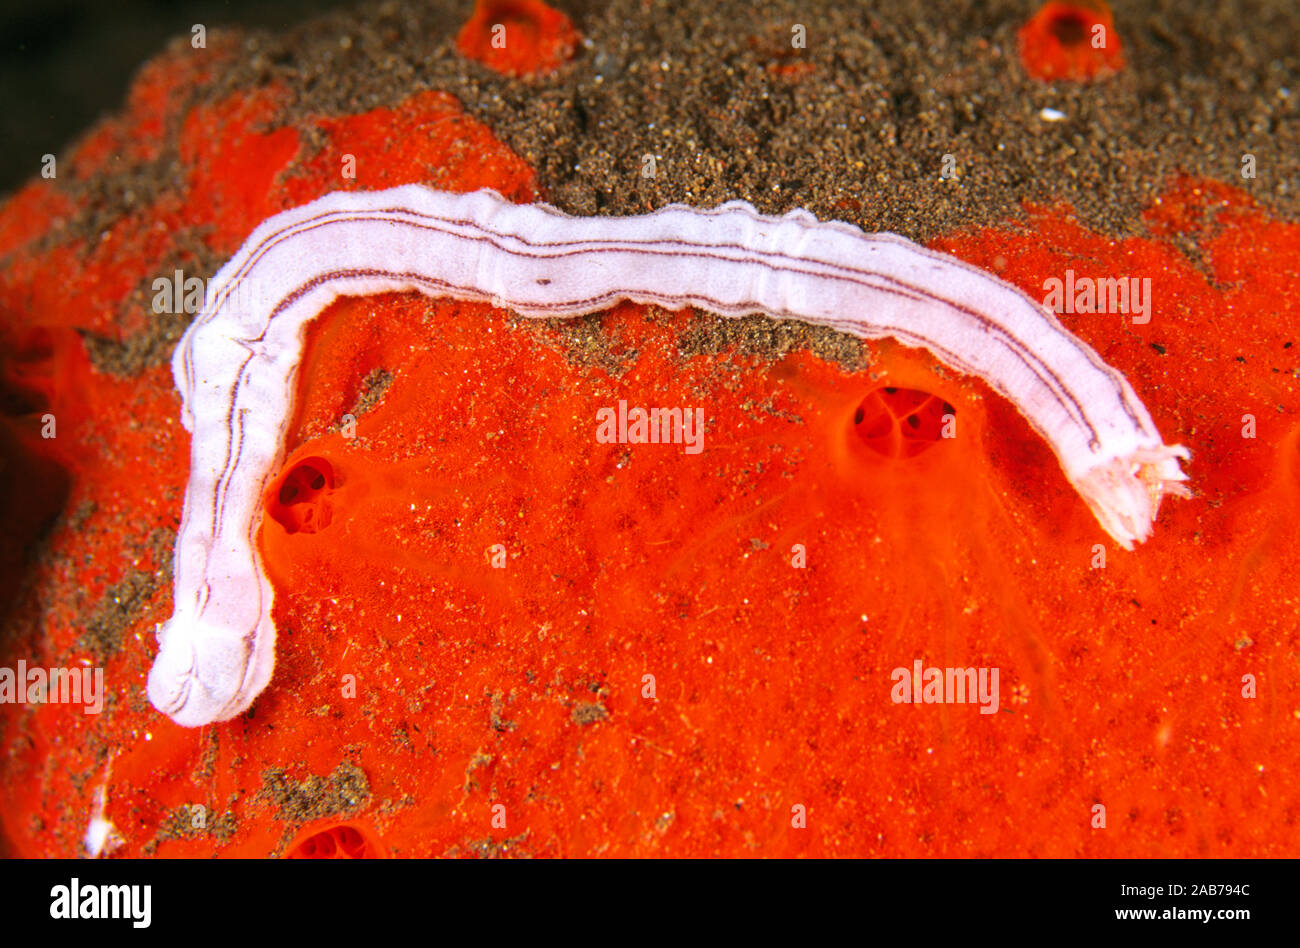 Little brown and white striped sea cucumber (Synaptula lamperti), small member of sea cucumber or trepang family. Bali, Indonesia Stock Photo